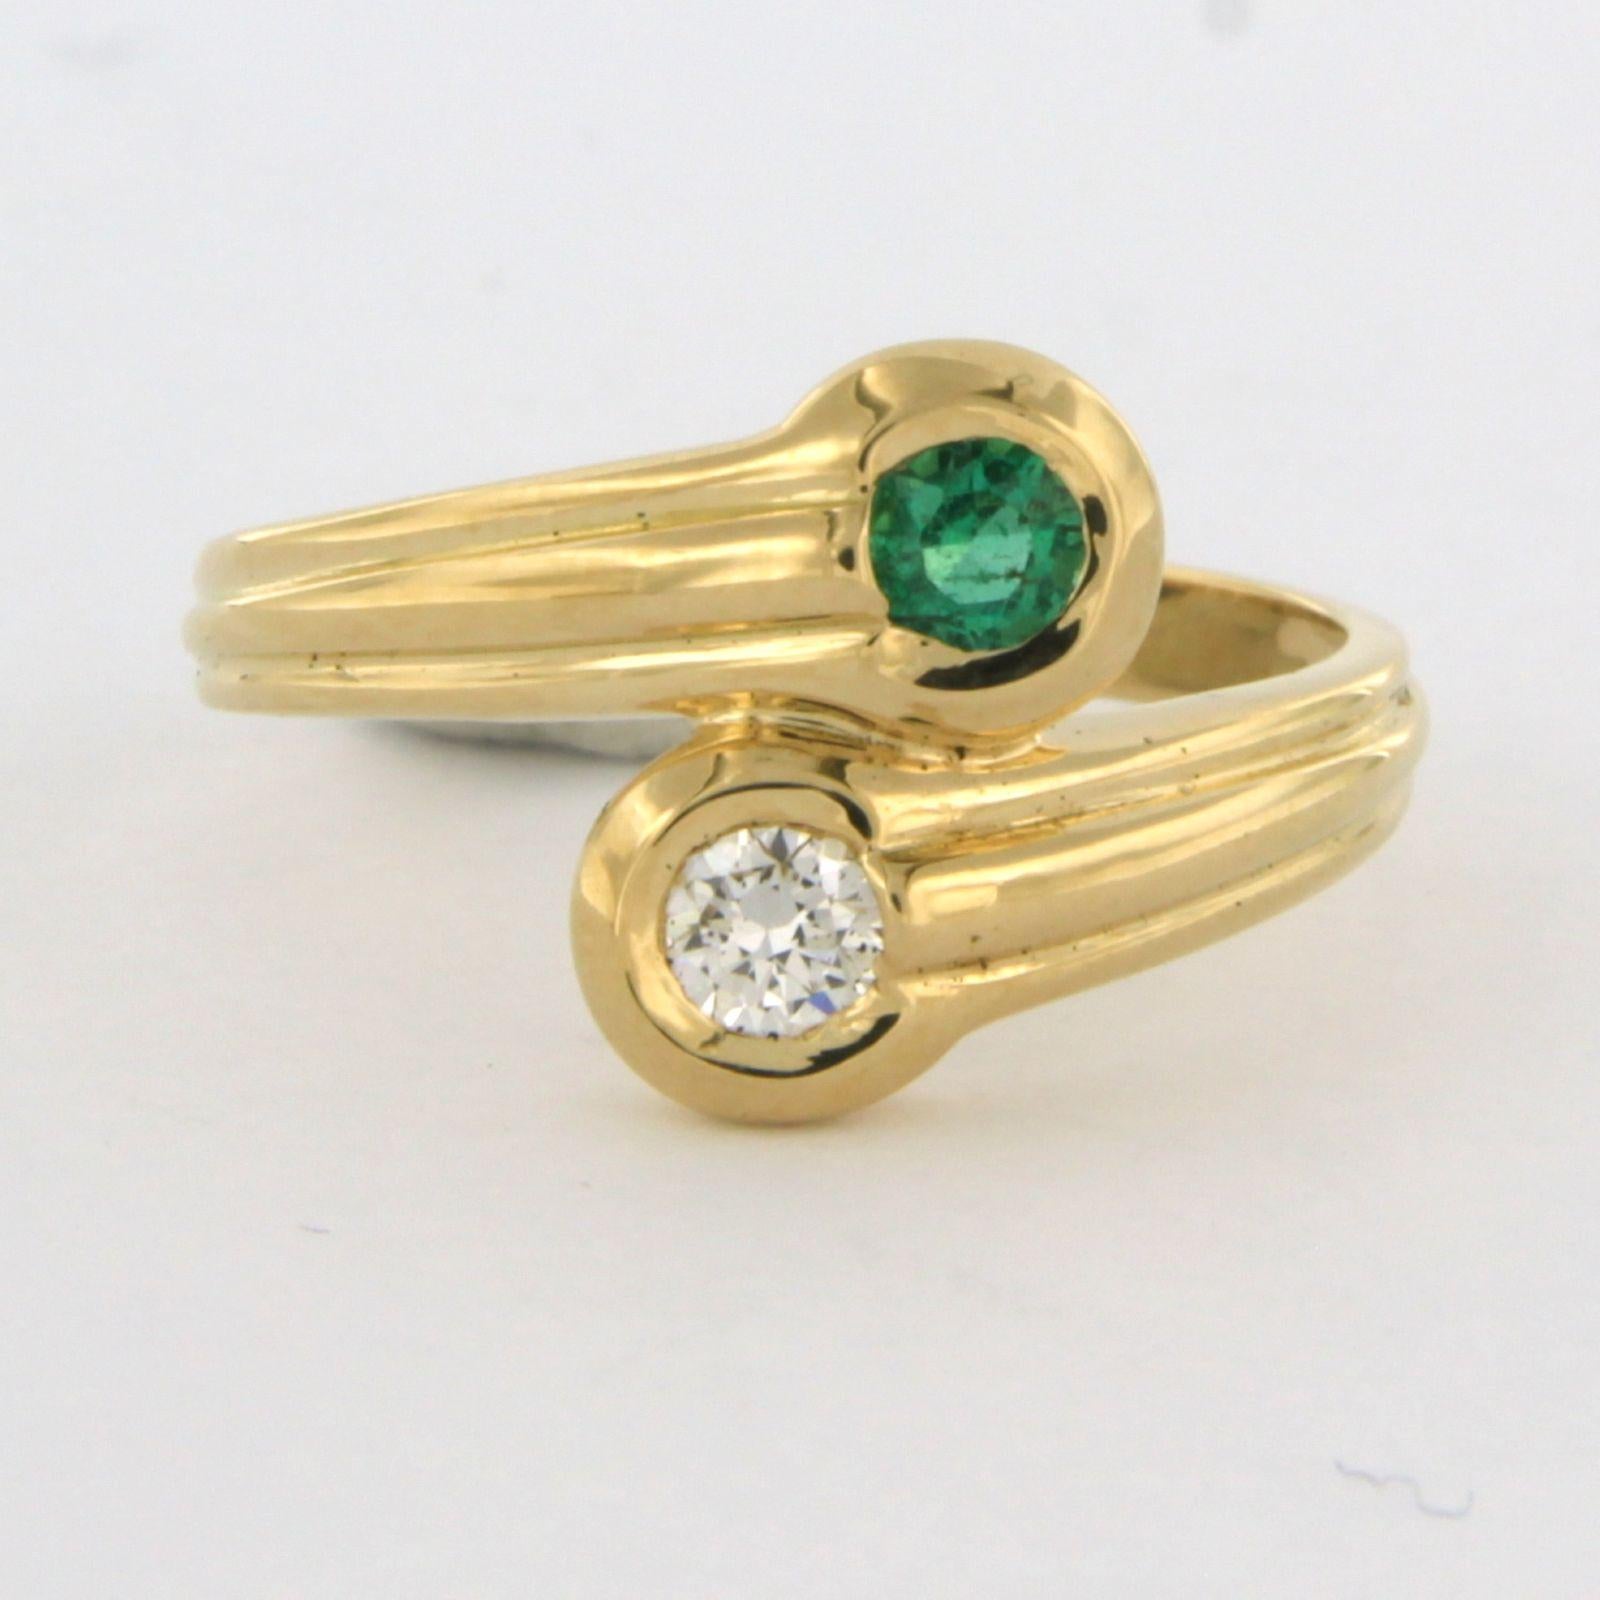 18k yellow gold ring set with emerald and brilliant cut diamond up to 0.10ct - F/G - VS/SI - ring size U.S. 6 - EU. 16.5 (52)

detailed description:

The top of the ring is 1.2 cm wide by 3.5 mm high

Ring size US 6 - EU. 16.5 (52), ring can be